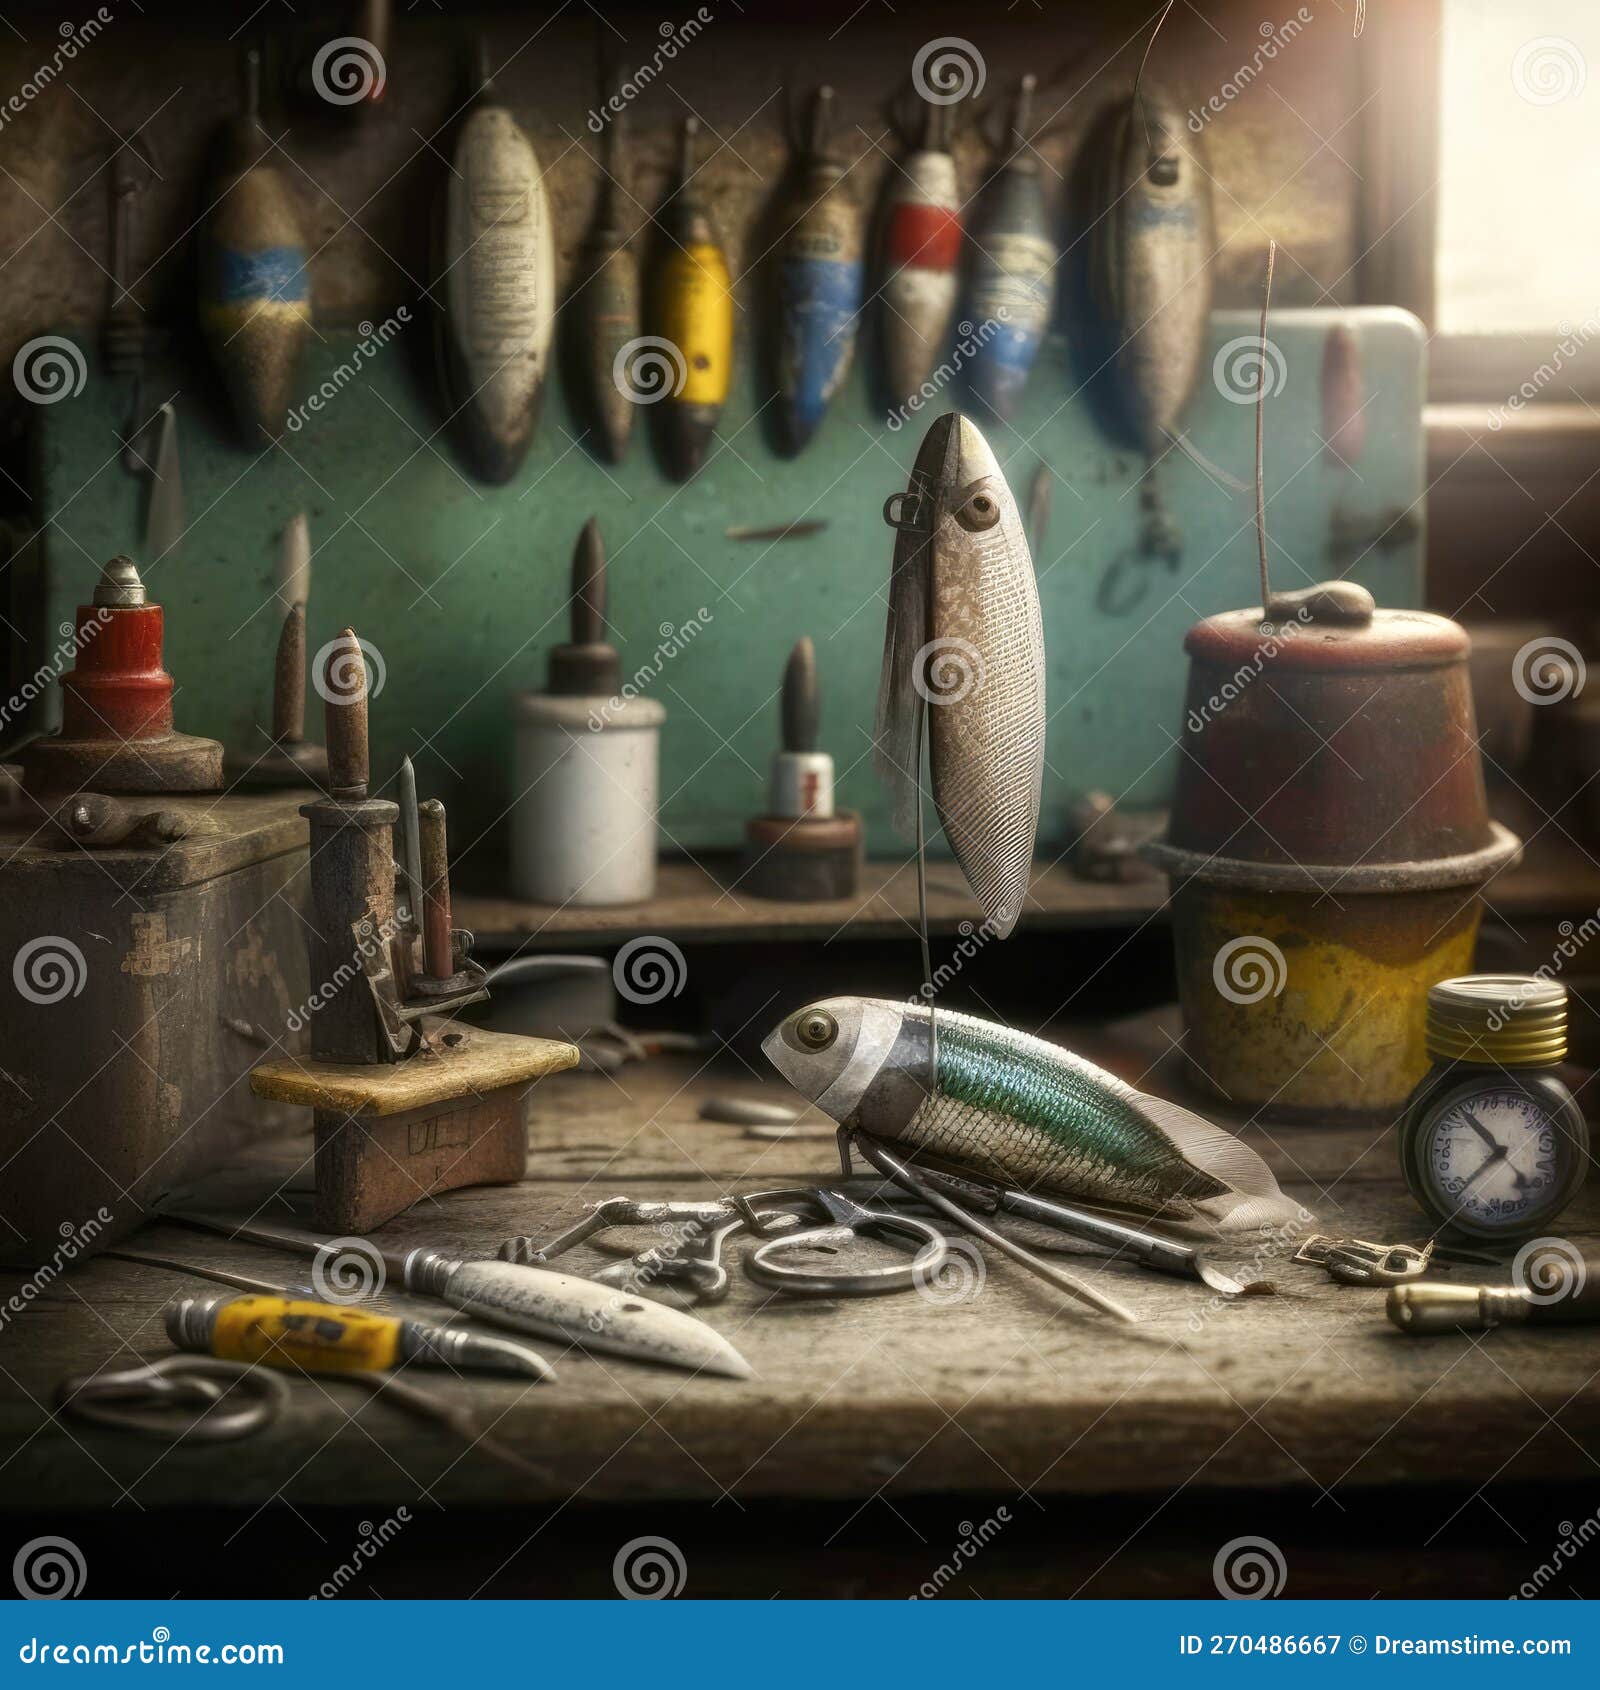 Vintage Fishing Lures on Work Bench Stock Image - Image of creel, tool:  270486667